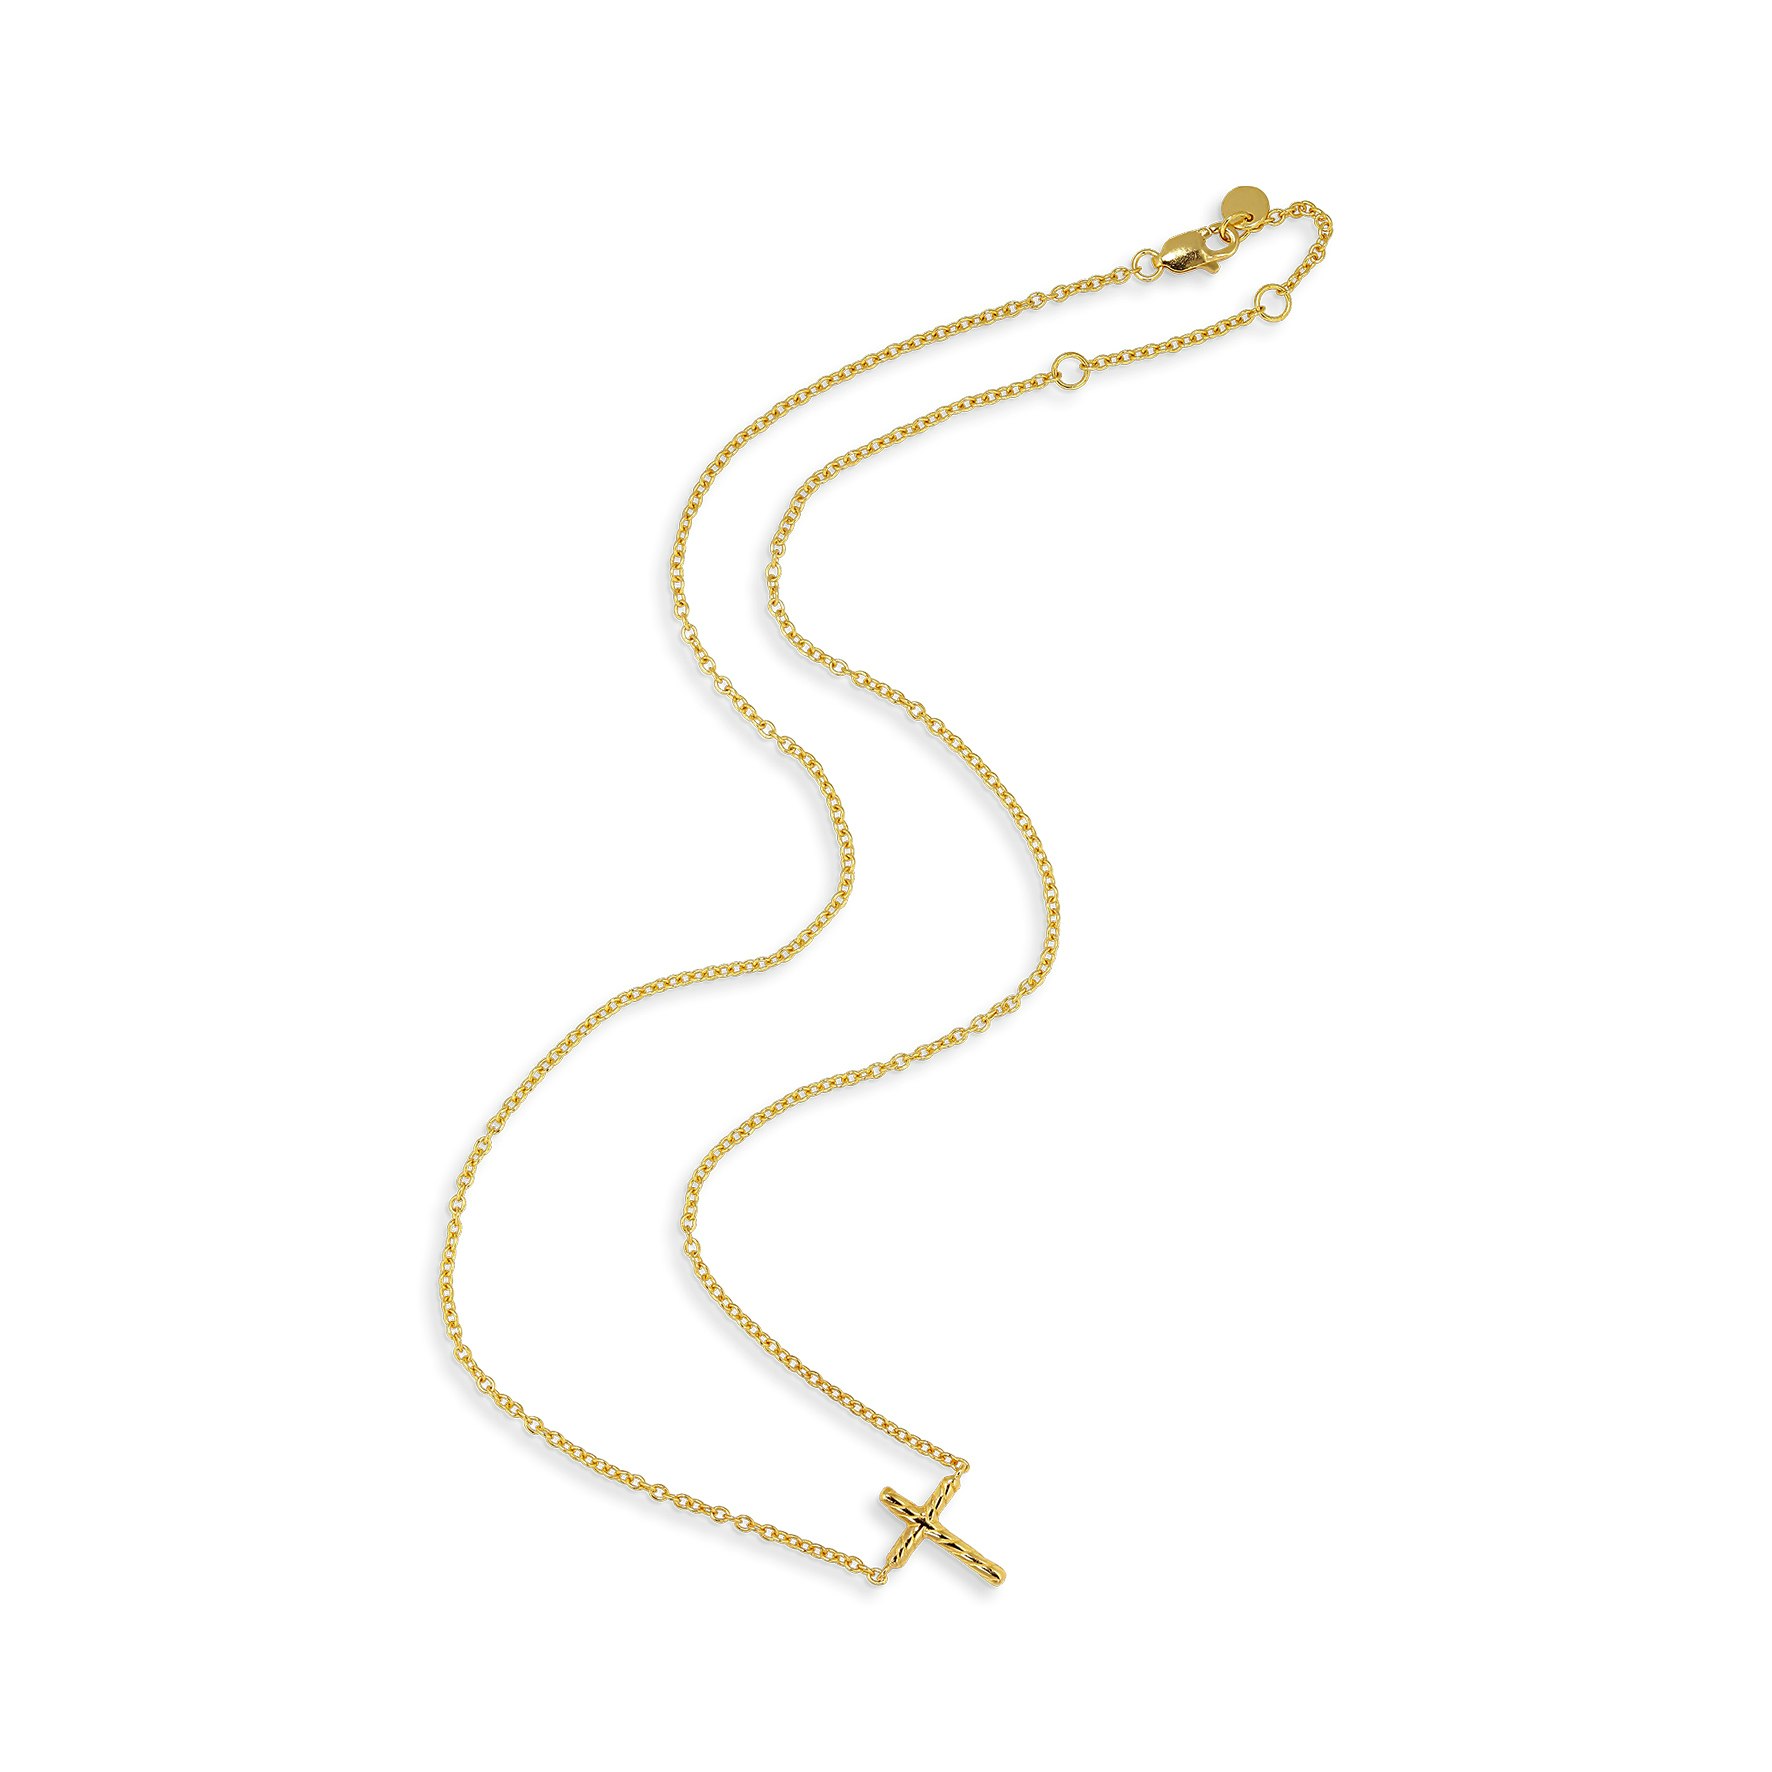 Cross Necklace from Jane Kønig in Goldplated Silver Sterling 925